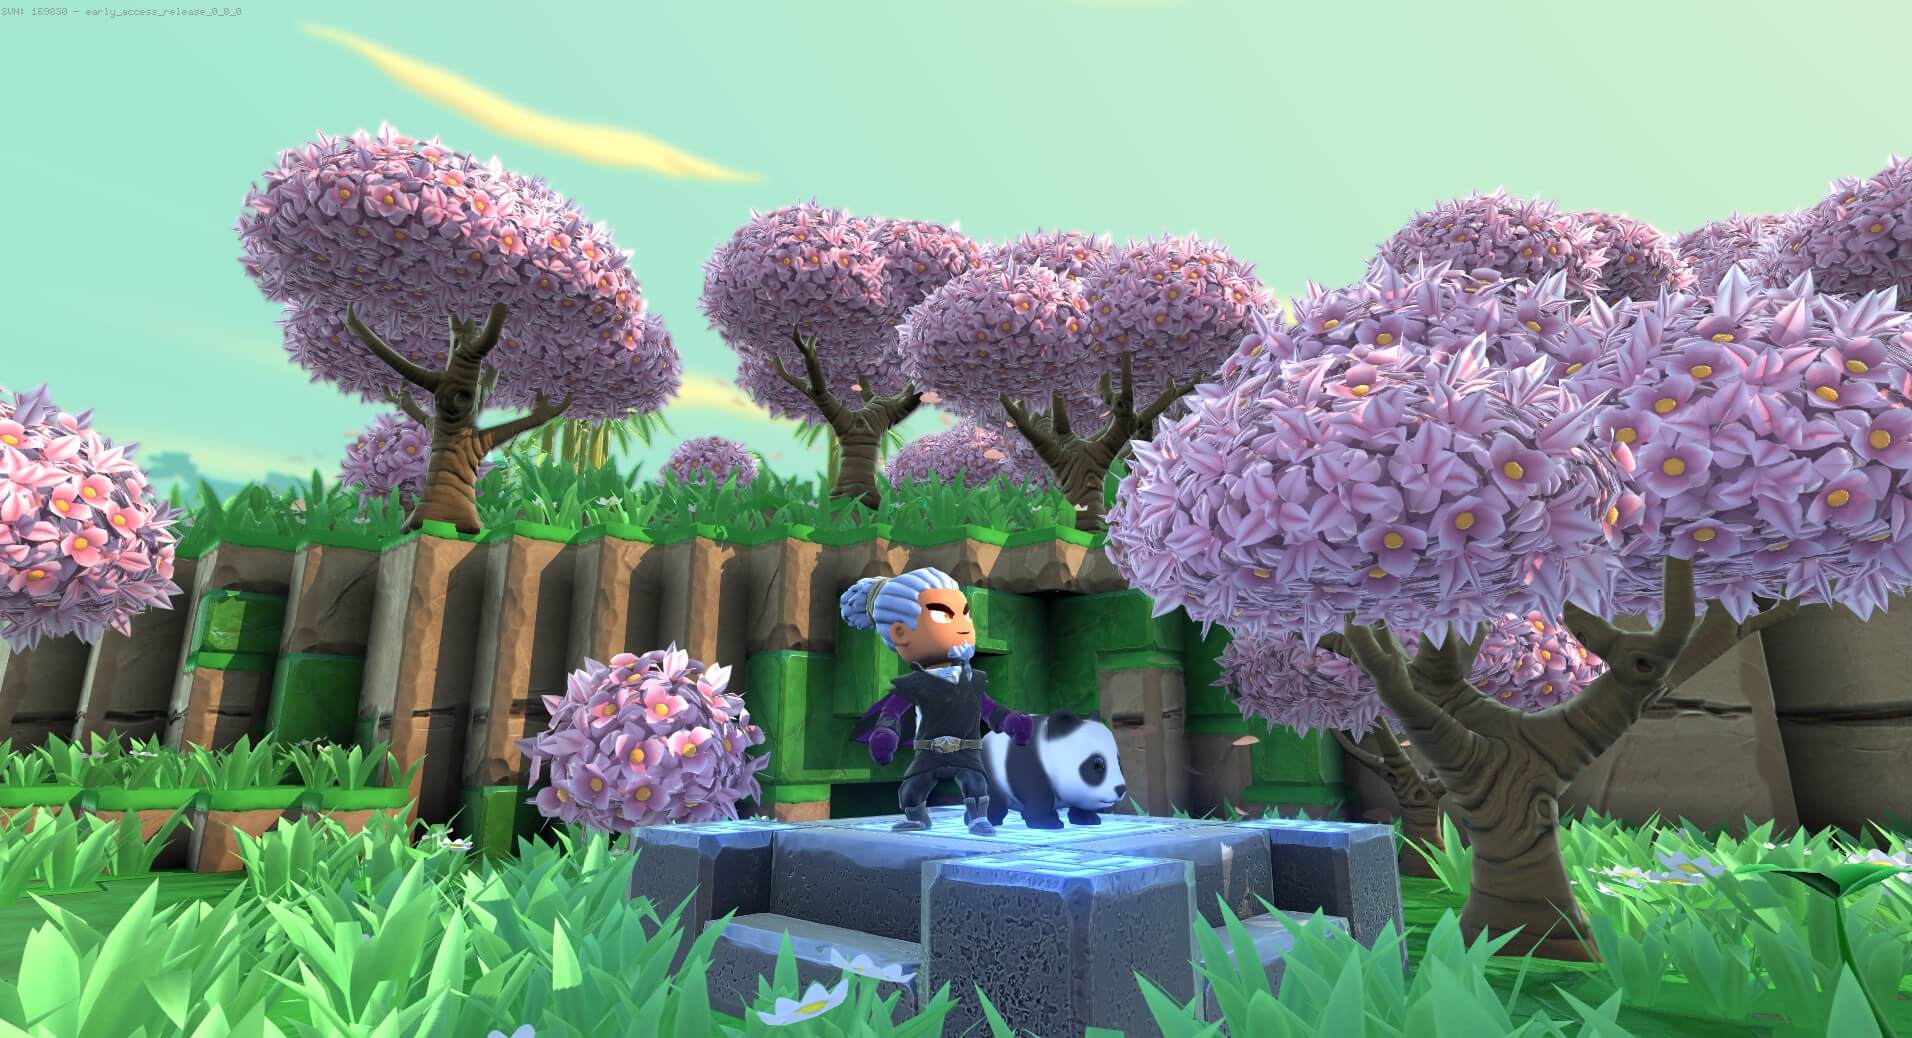 Portal Knights Screenshot of character with pet panda in a field with trees